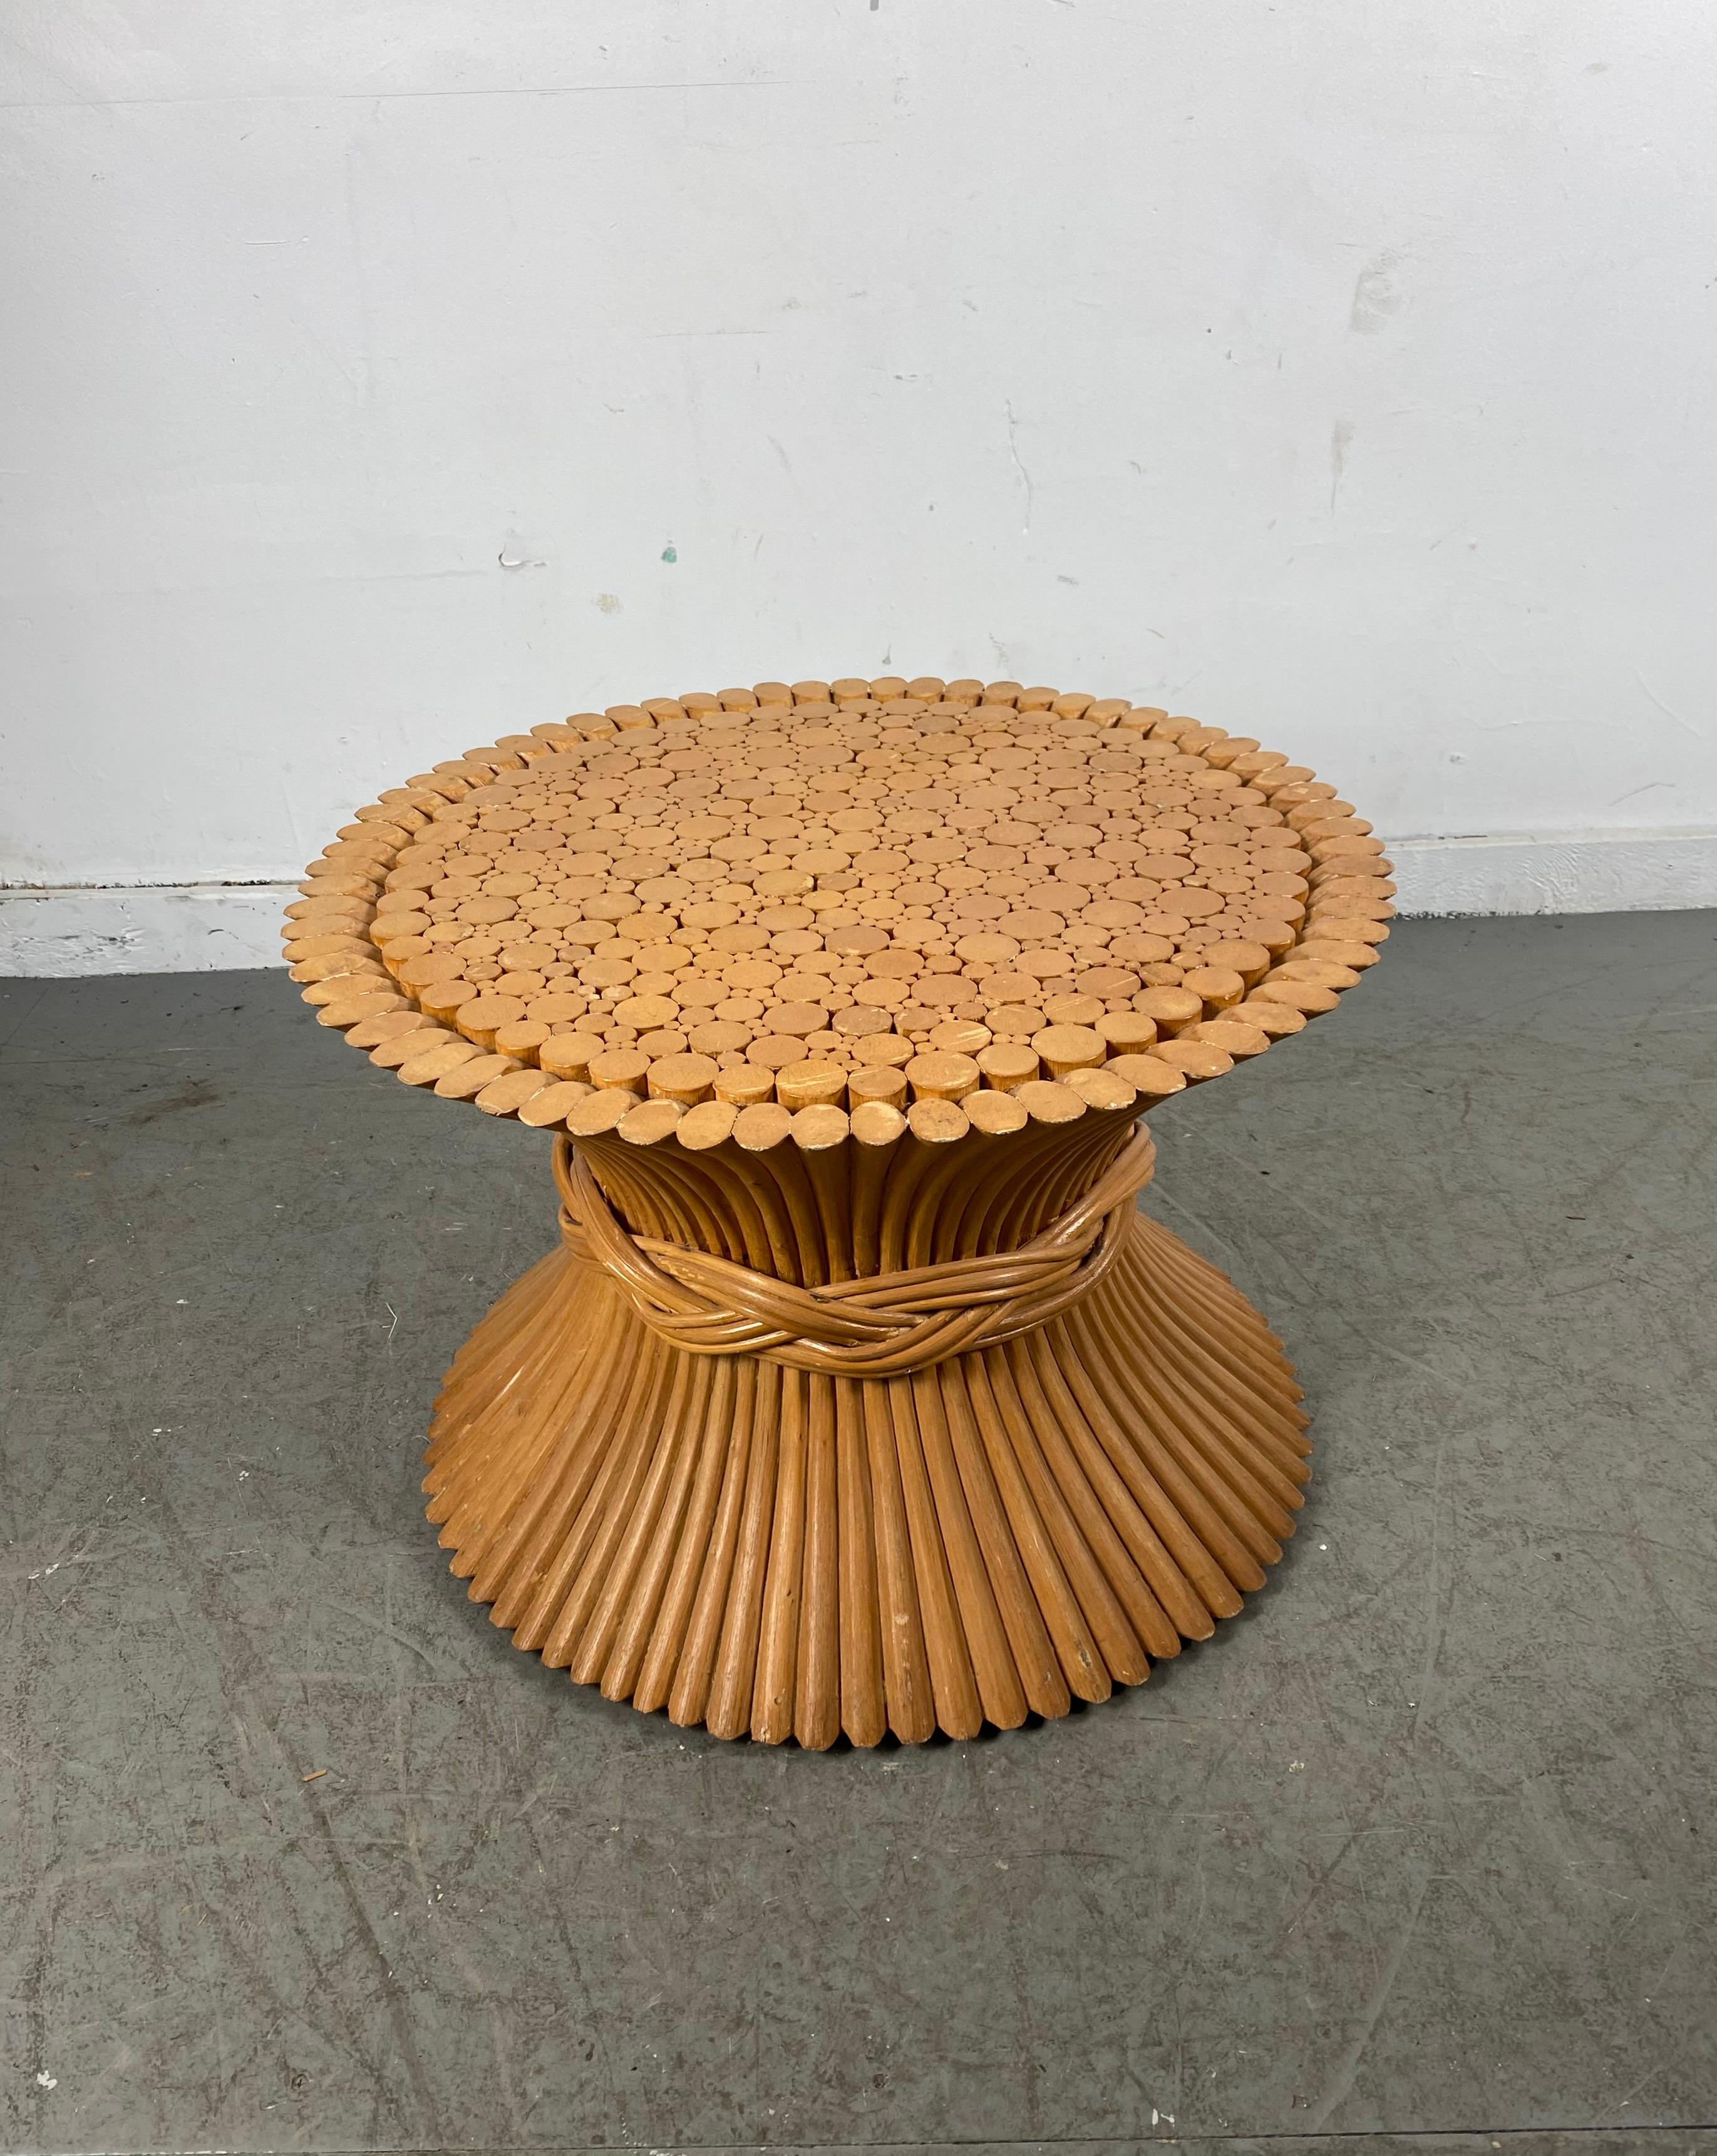 Classic Mid Century Modernist, Hollywood Regency occasional table by McGuire of San Francisco. Beautiful bundle of wheat form constructed of bamboo, minor scratches to top. Please check additional listings for coffee table, dining table and end